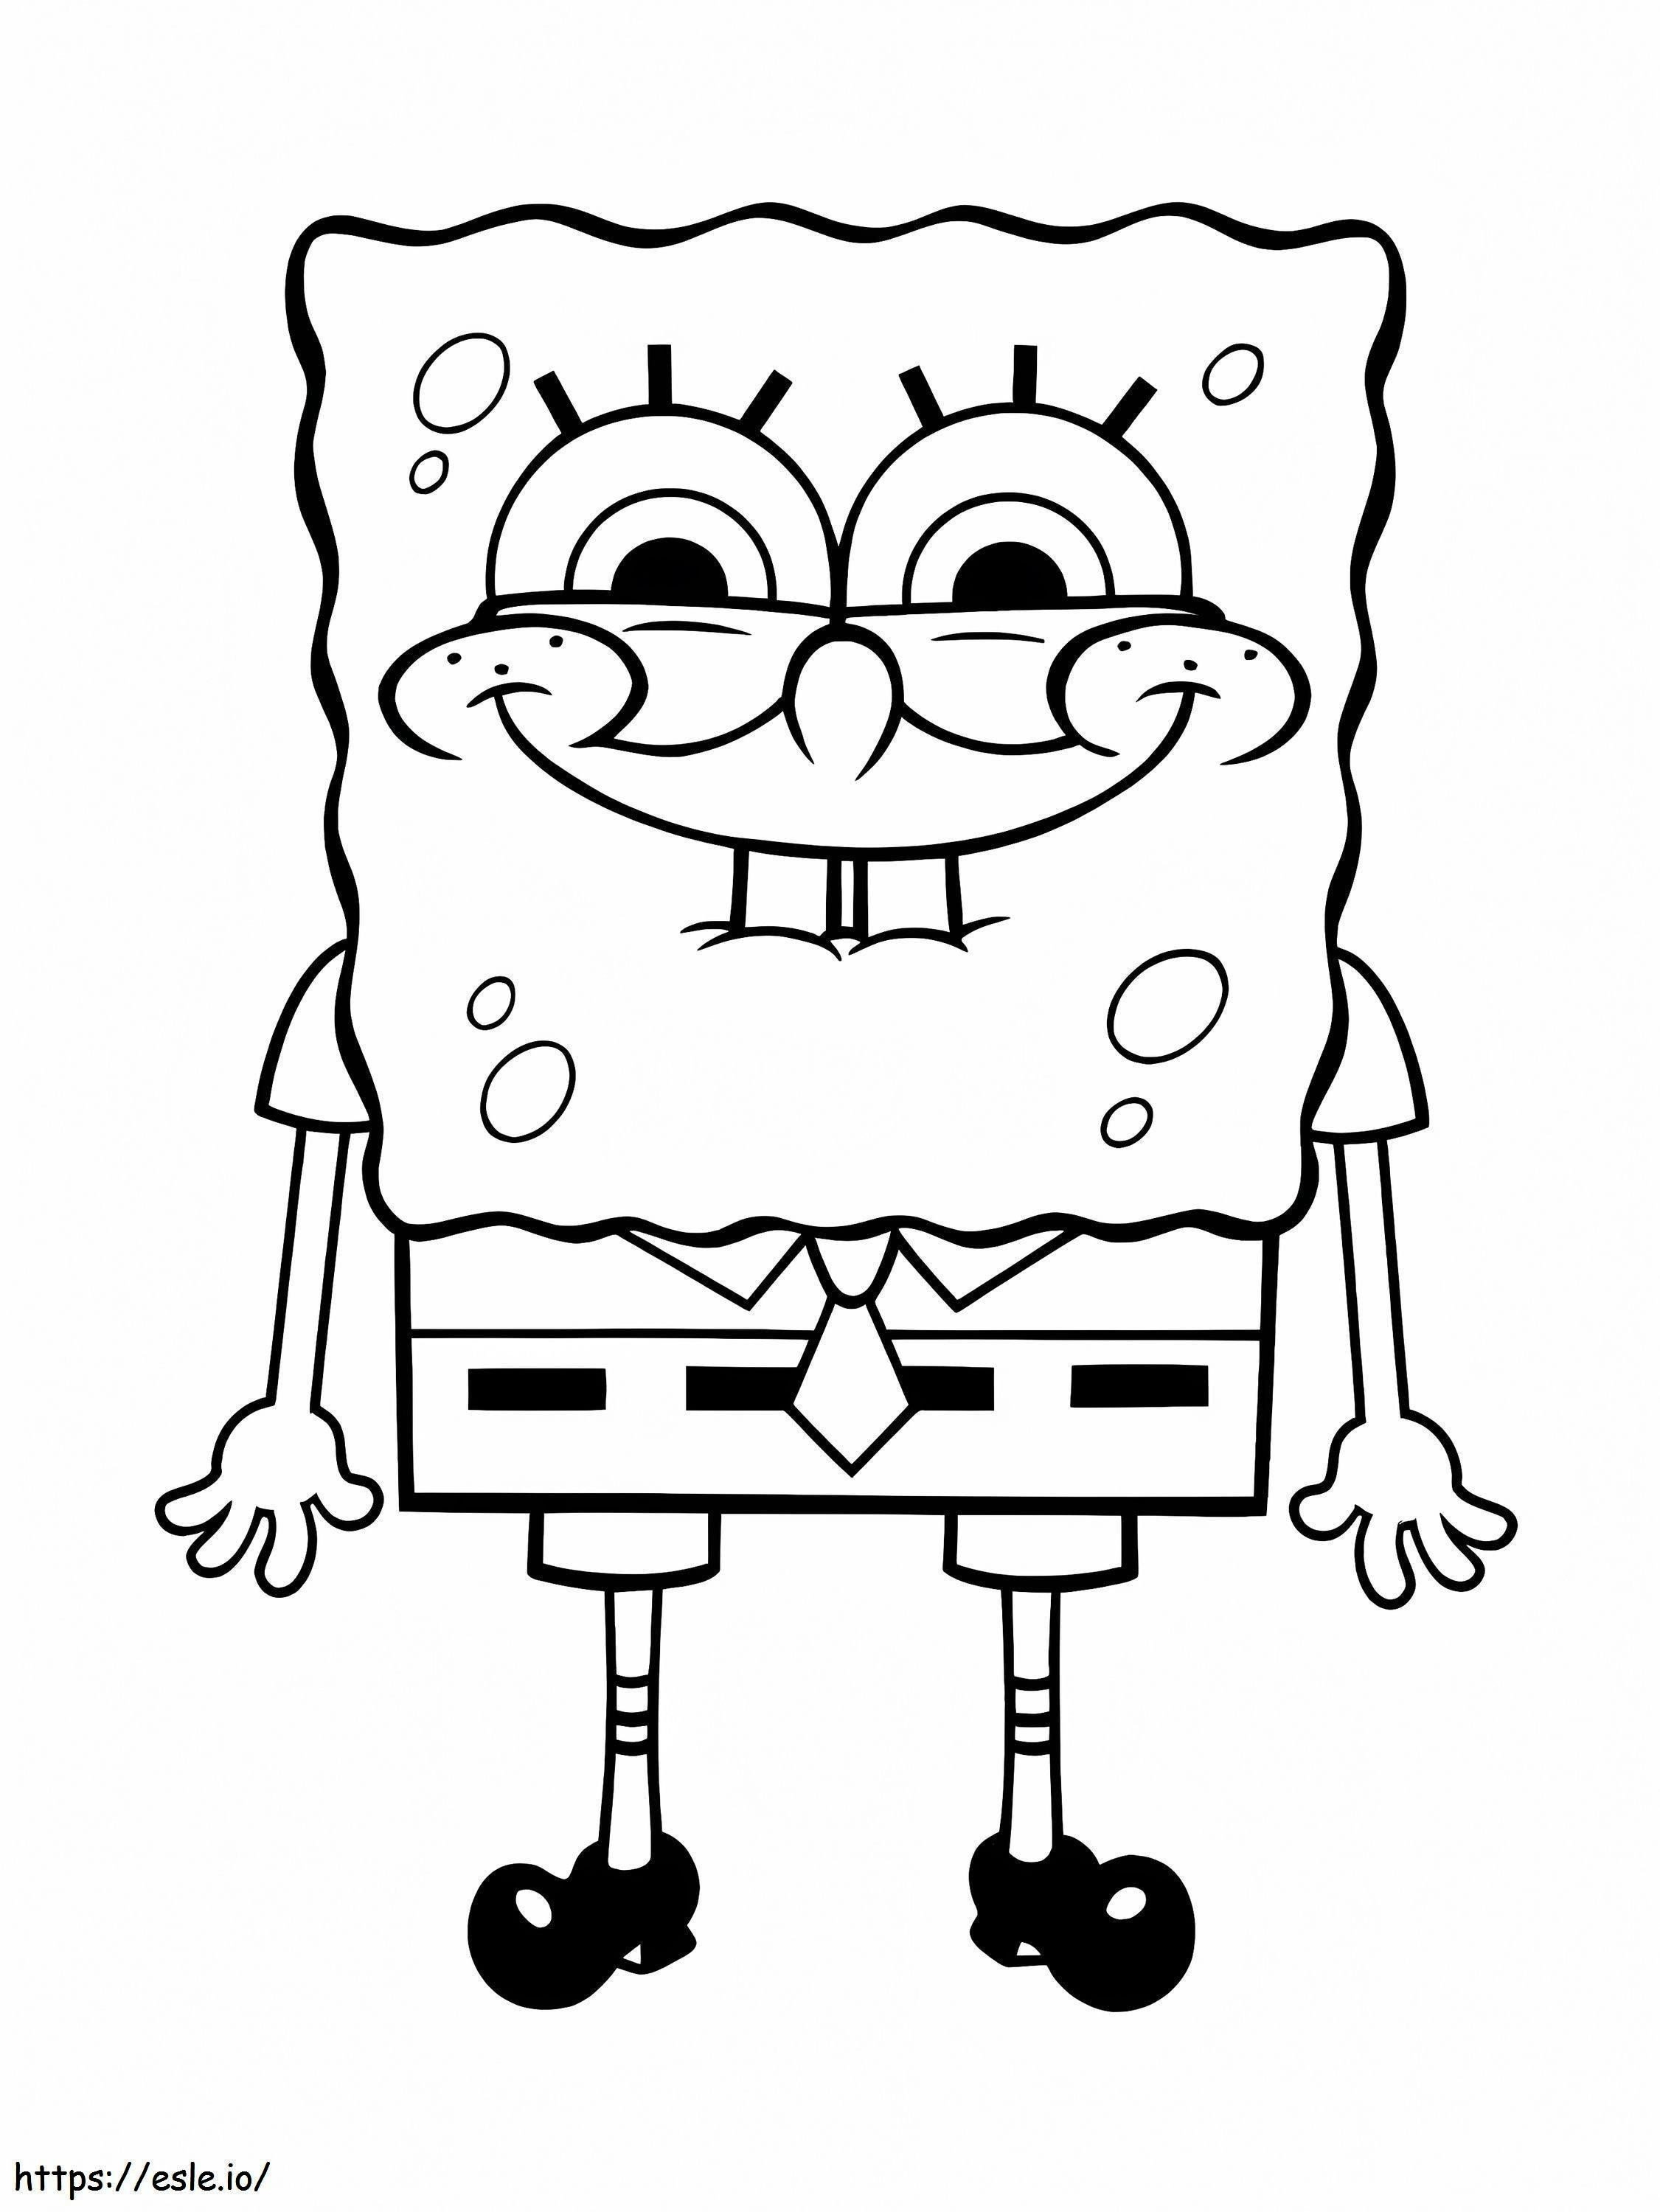 SpongeBob With Funny Smile coloring page